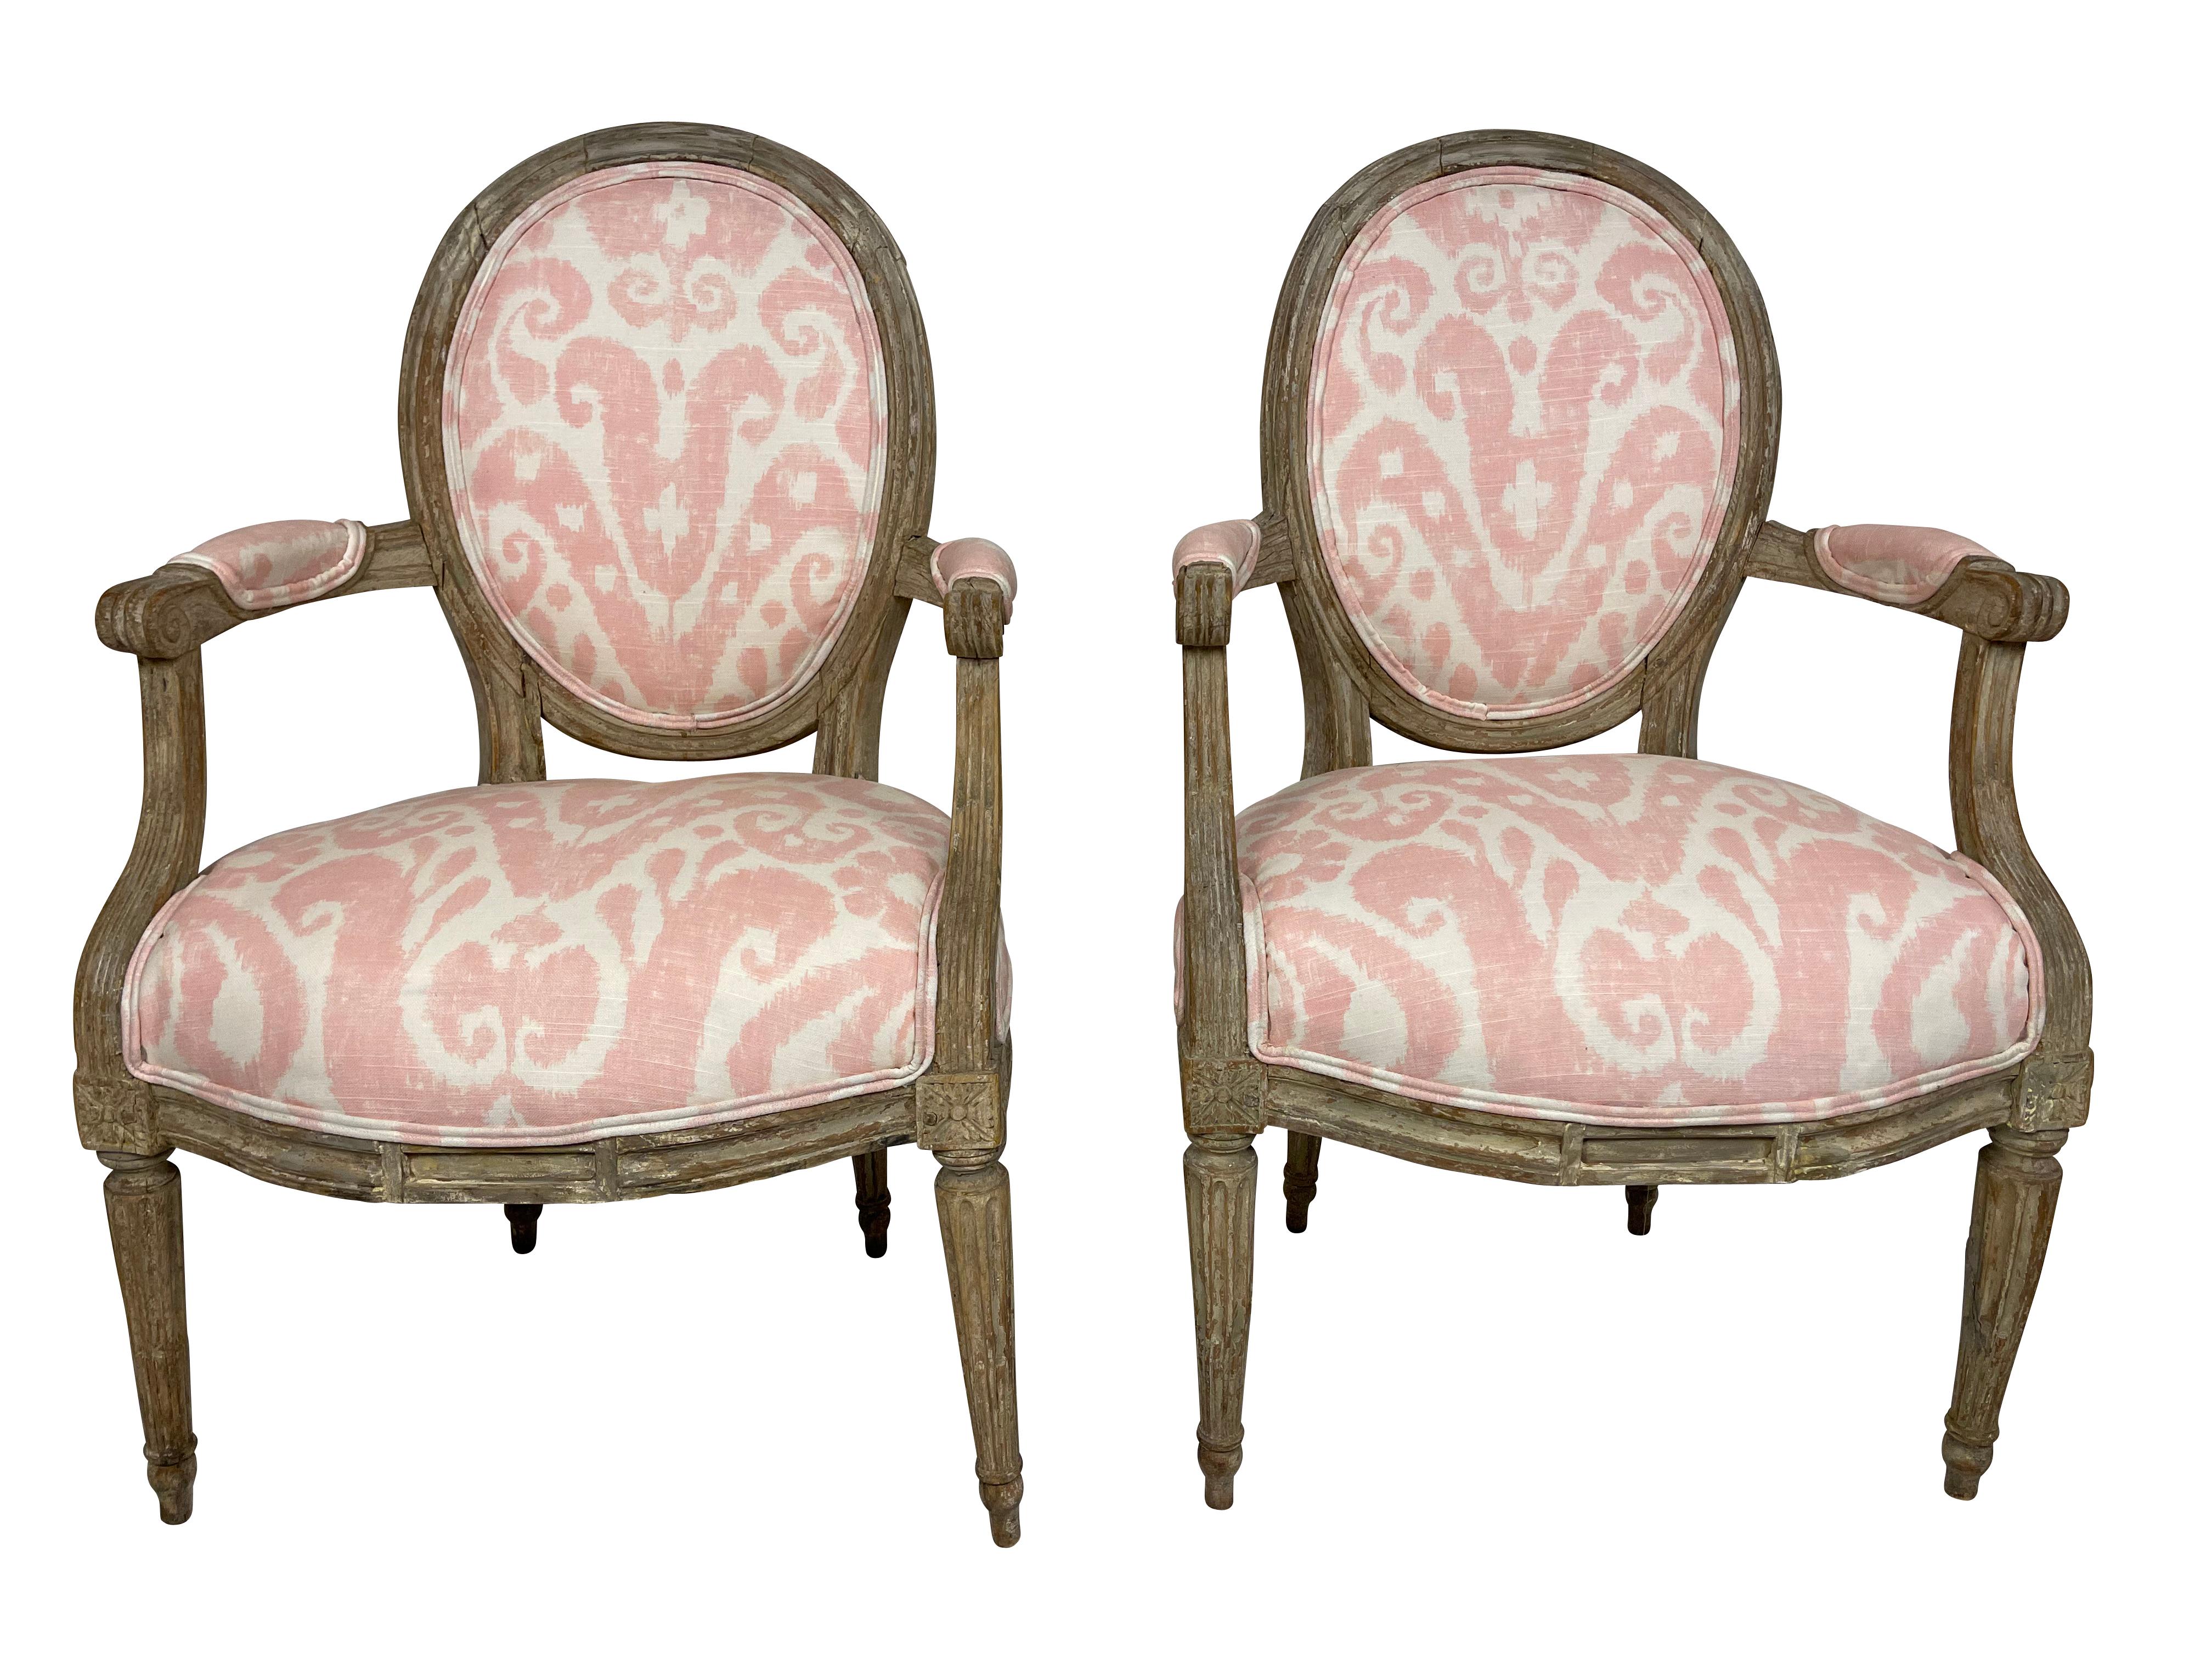 A pair of diminutive size Louis XVI style original grey paint, and carved armchairs, newly reupholstered in a modern pink and white Ikat fabric. Oval backs, reeded legs with rosette decoration. Perfect for a bedroom, bathroom, or child's bedroom.